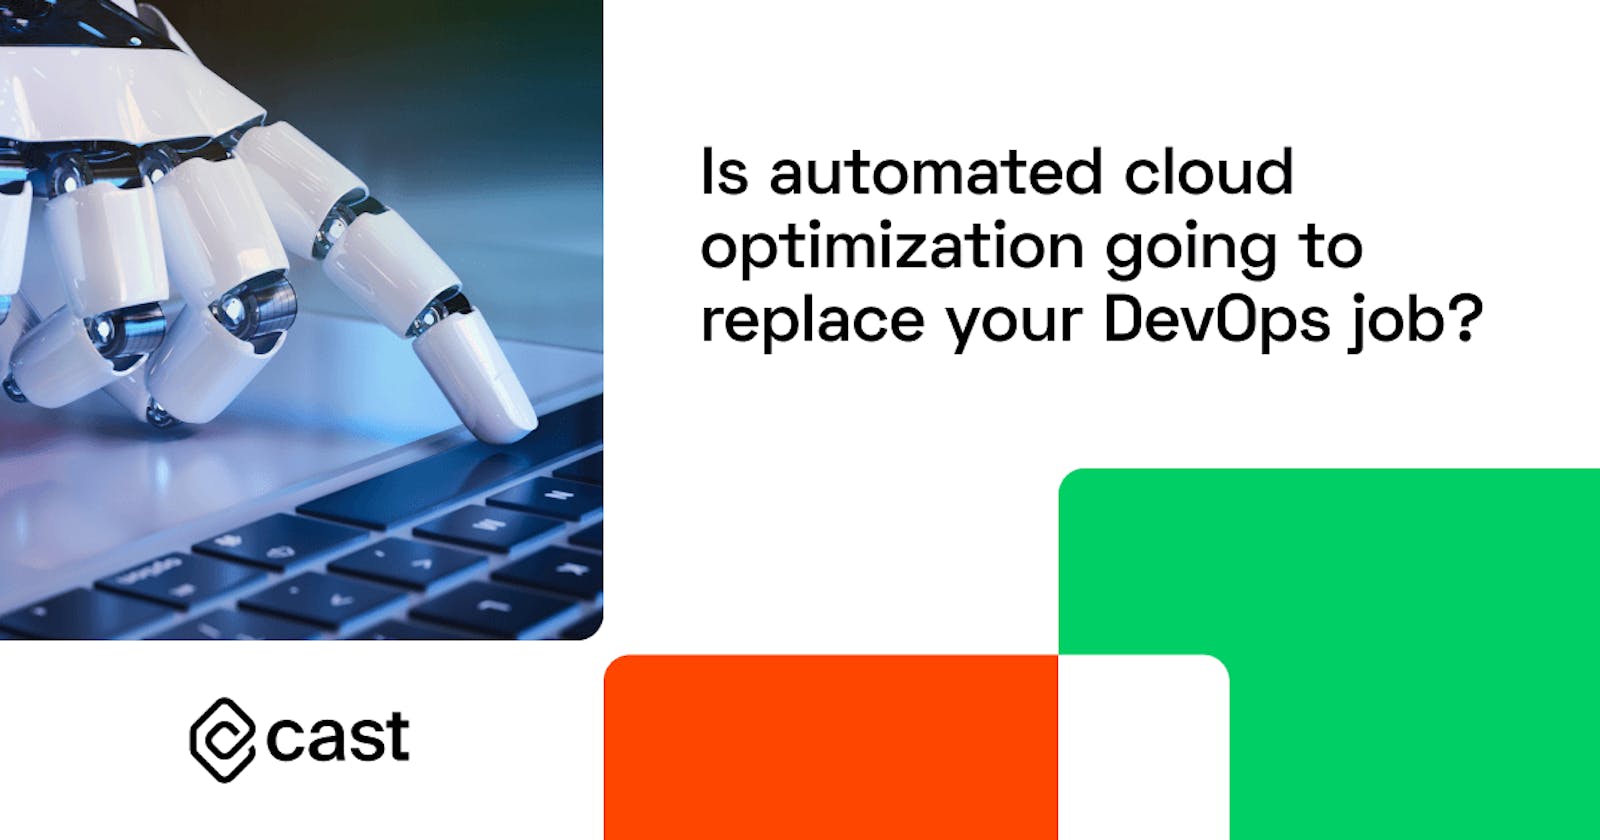 Will automated cloud optimization replace your DevOps job?